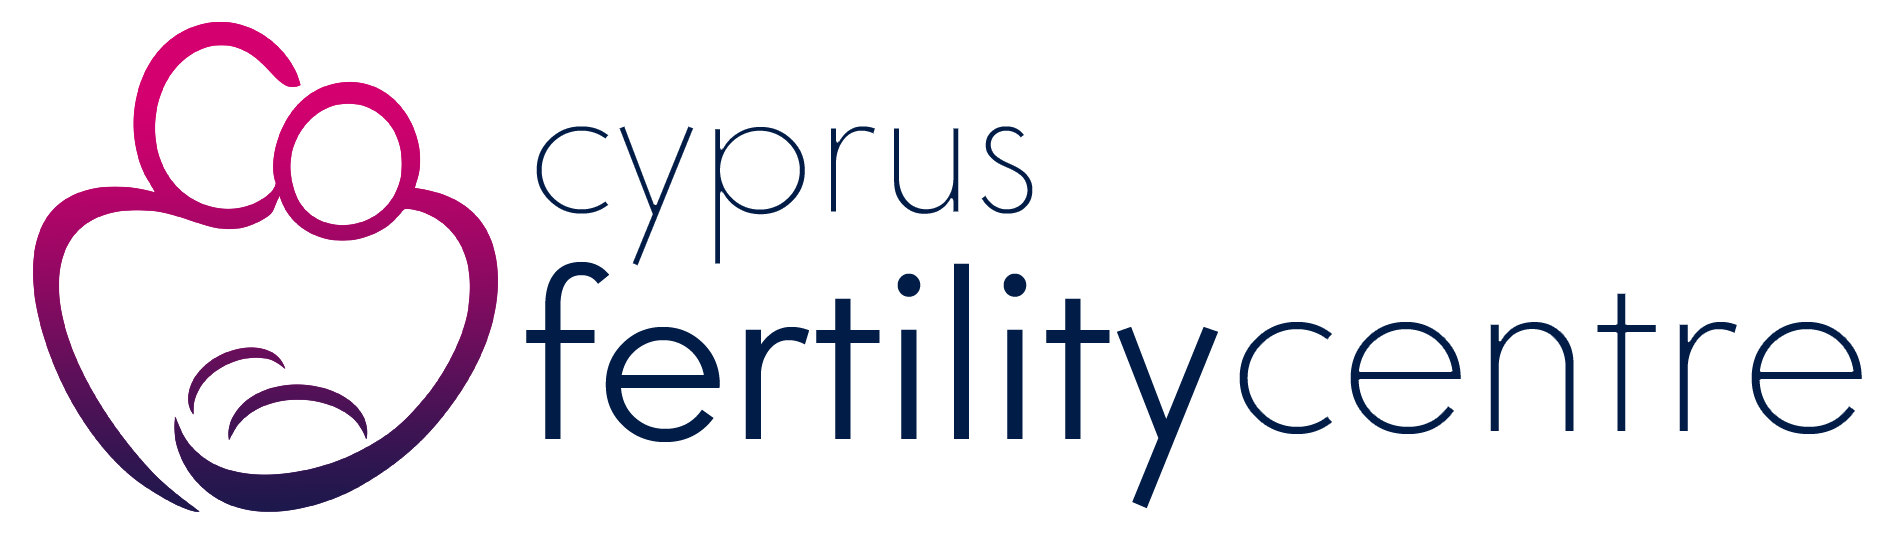 Cyprus Fertility Centre | Cyprus Ivf Centre | ivf centre | North Cyprus Ivf | Egg donation | Embryo donation | Sperm donation | Tandem cycle